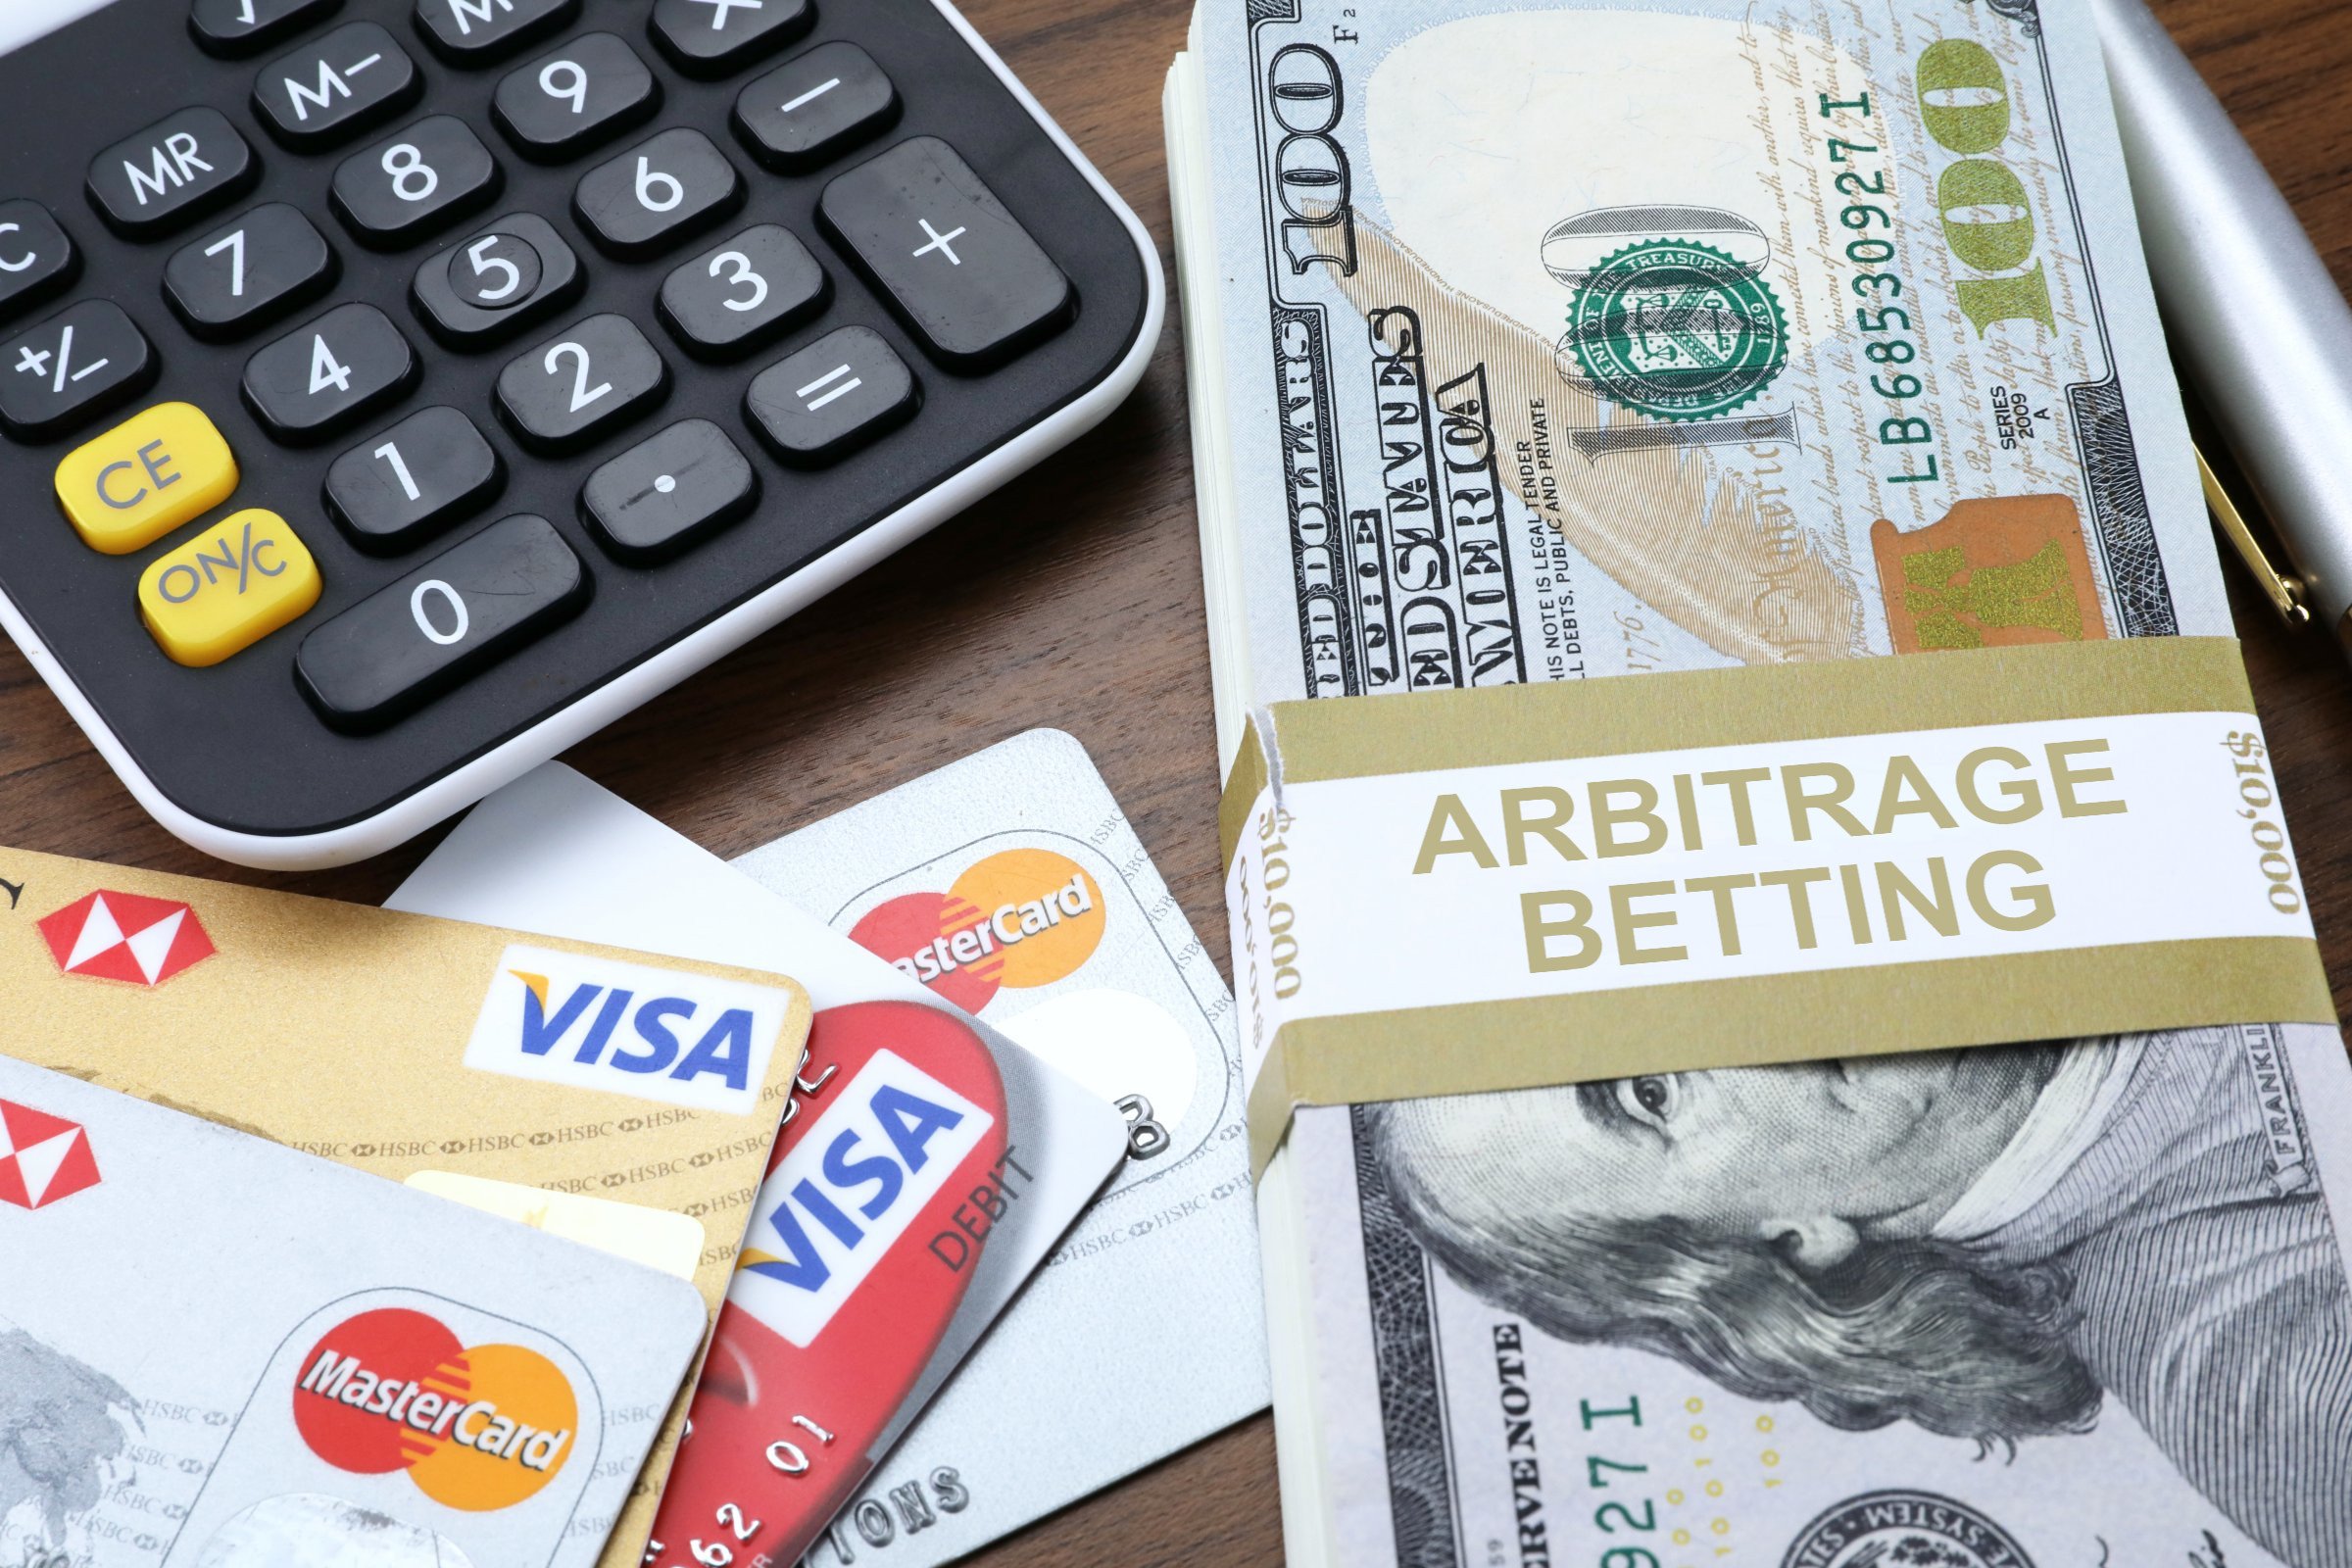 Arbitrage Betting - Free of Charge Creative Commons Financial 5 image